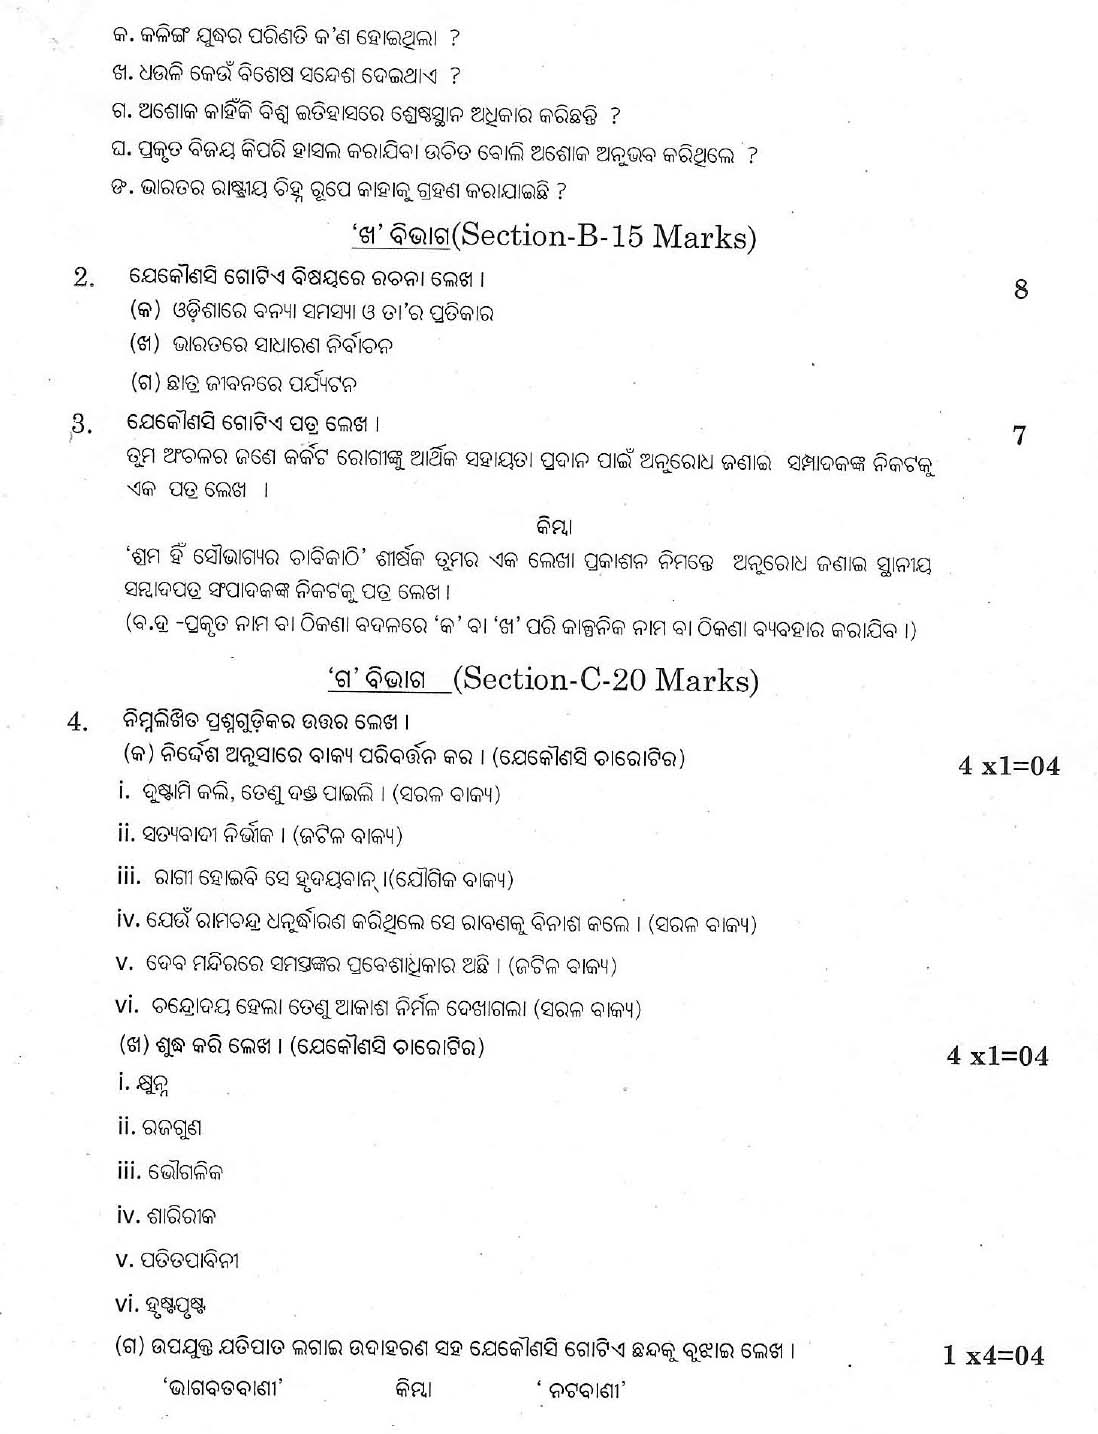 Odia CBSE Class X Sample Question Paper 2018-19 - Image 2